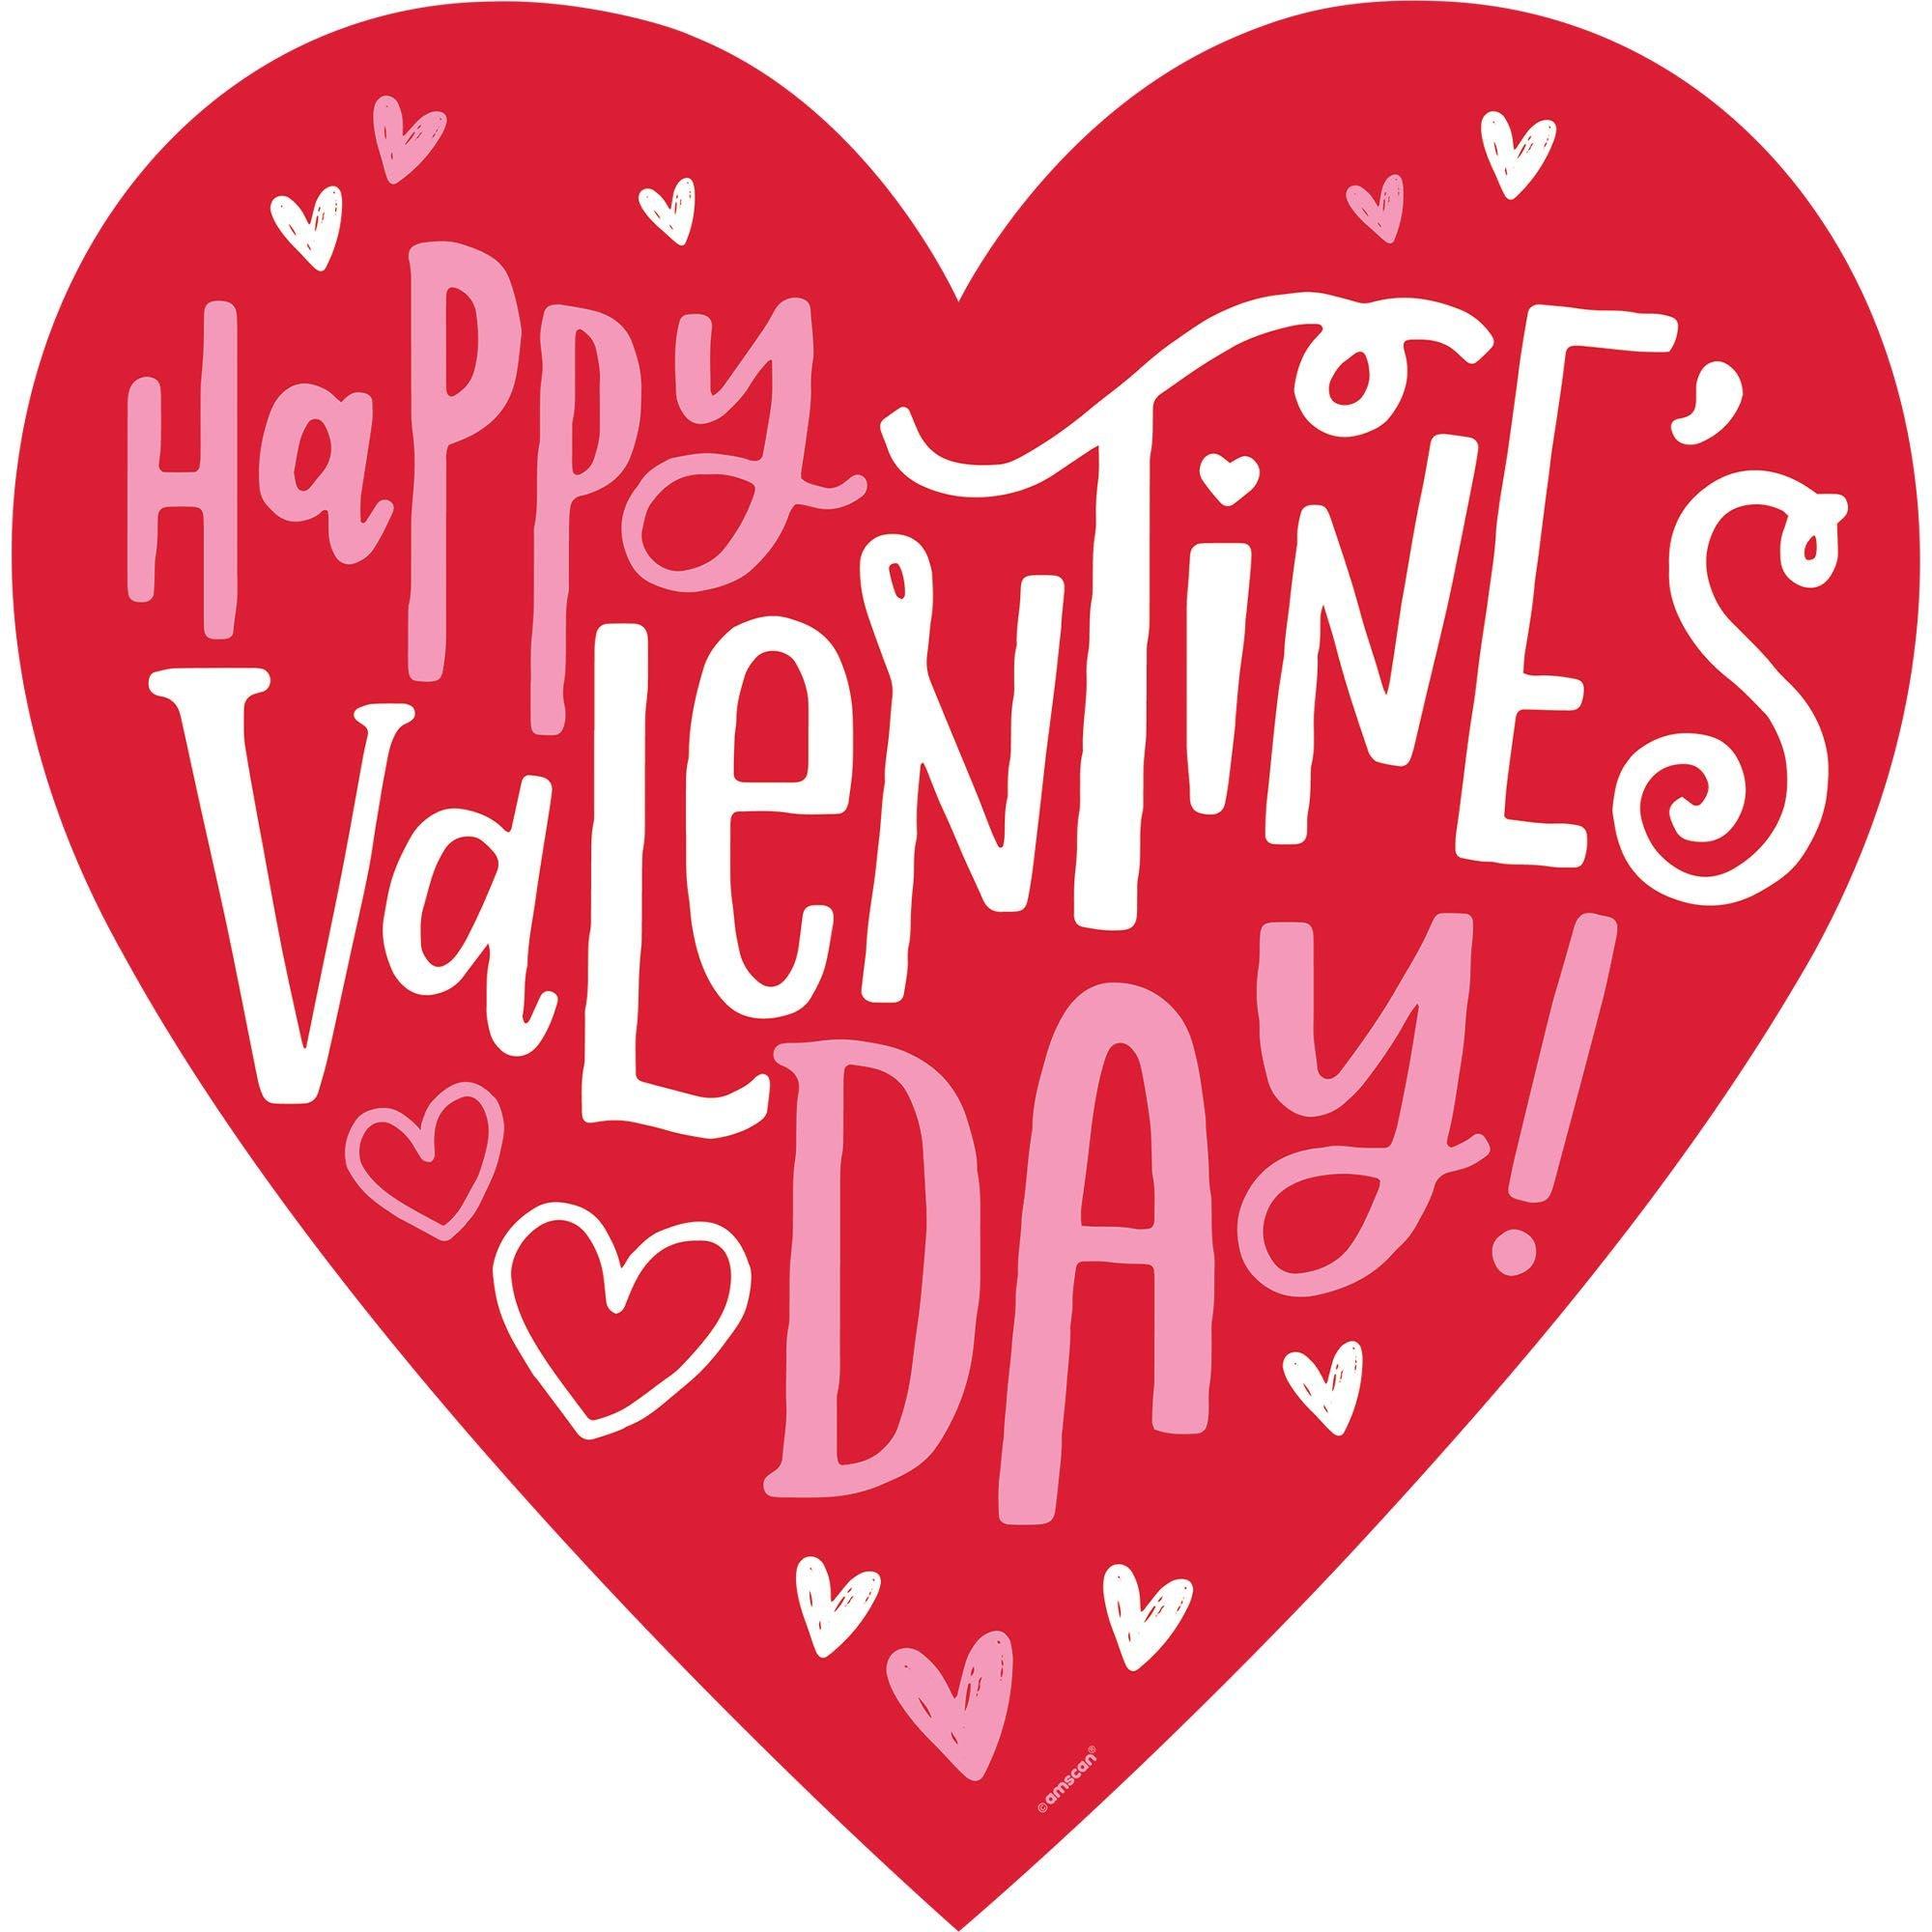 Happy Valentine's Day Heart Cardstock Cutout, 15.3in x 15.5in | Party City